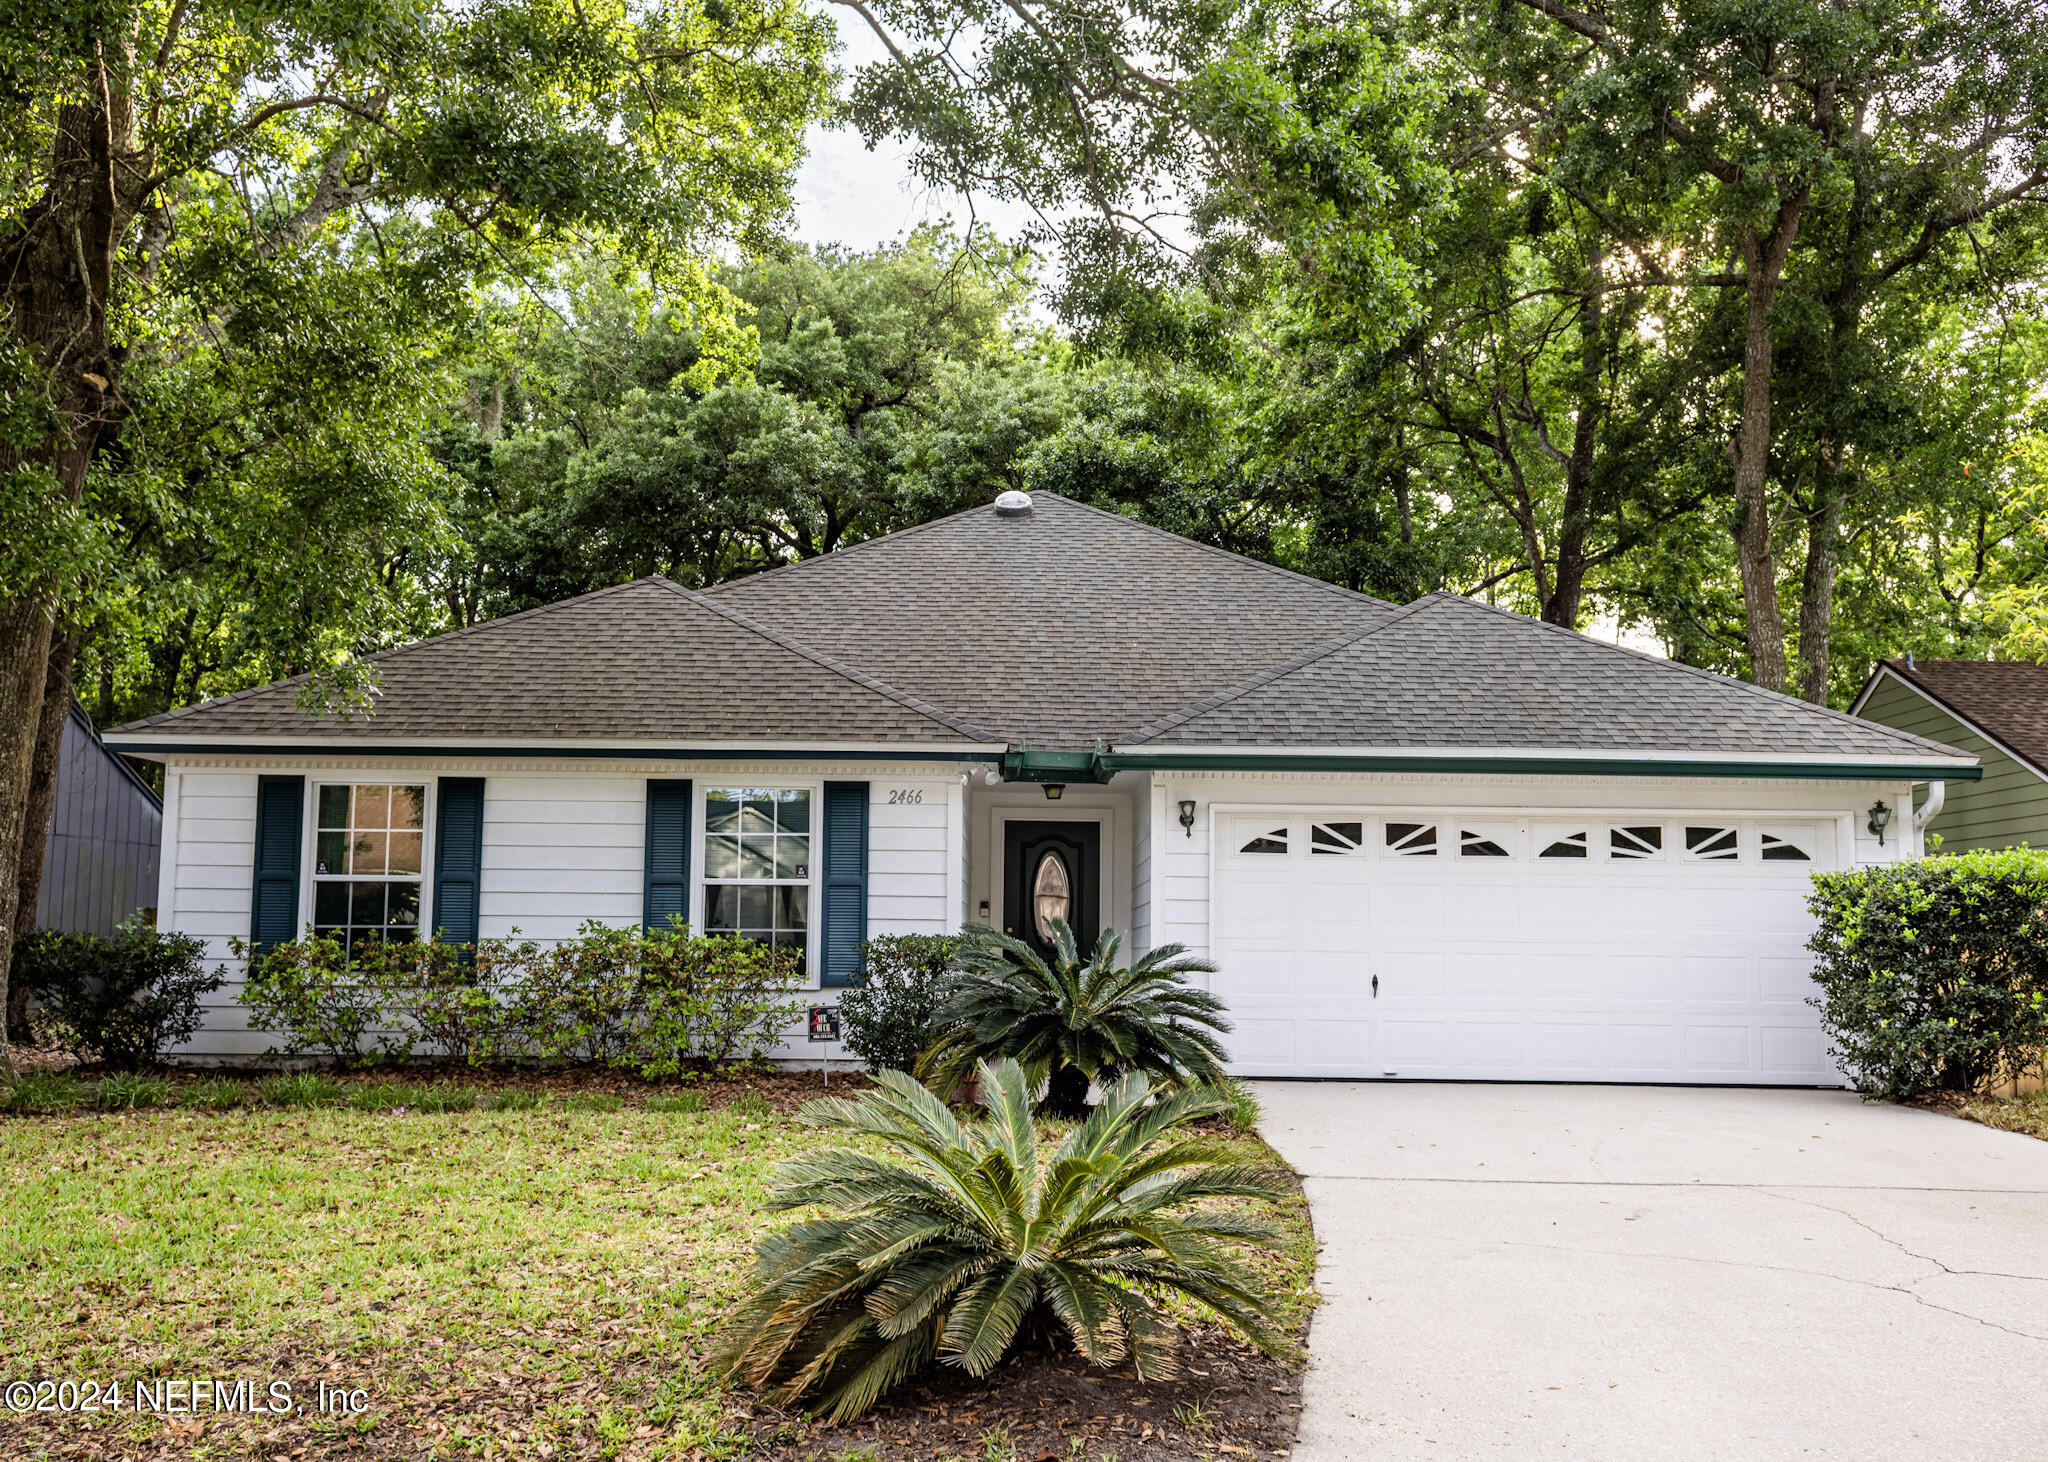 Jacksonville, FL home for sale located at 2466 Bluffton Drive, Jacksonville, FL 32224